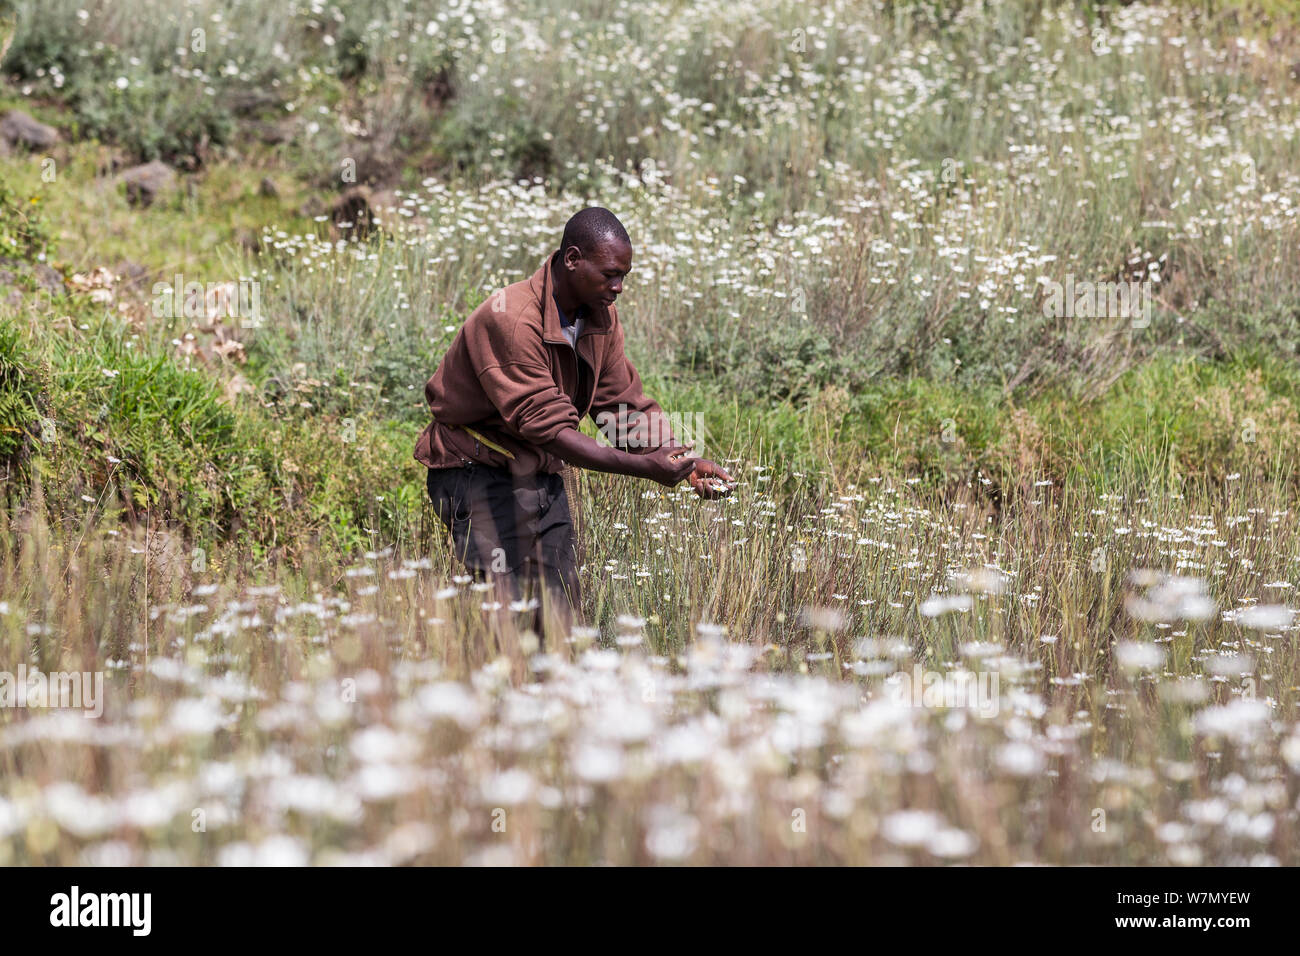 Man harvesting Pyrethrum, which refers to several Old World plants of the Chrysanthemum genus which are cultivated as ornamentals for their showy flower heads. Pyrethrum is also the name of a natural insecticide made from the dried flower heads of C. cinerariifolium  Rwanda Stock Photo